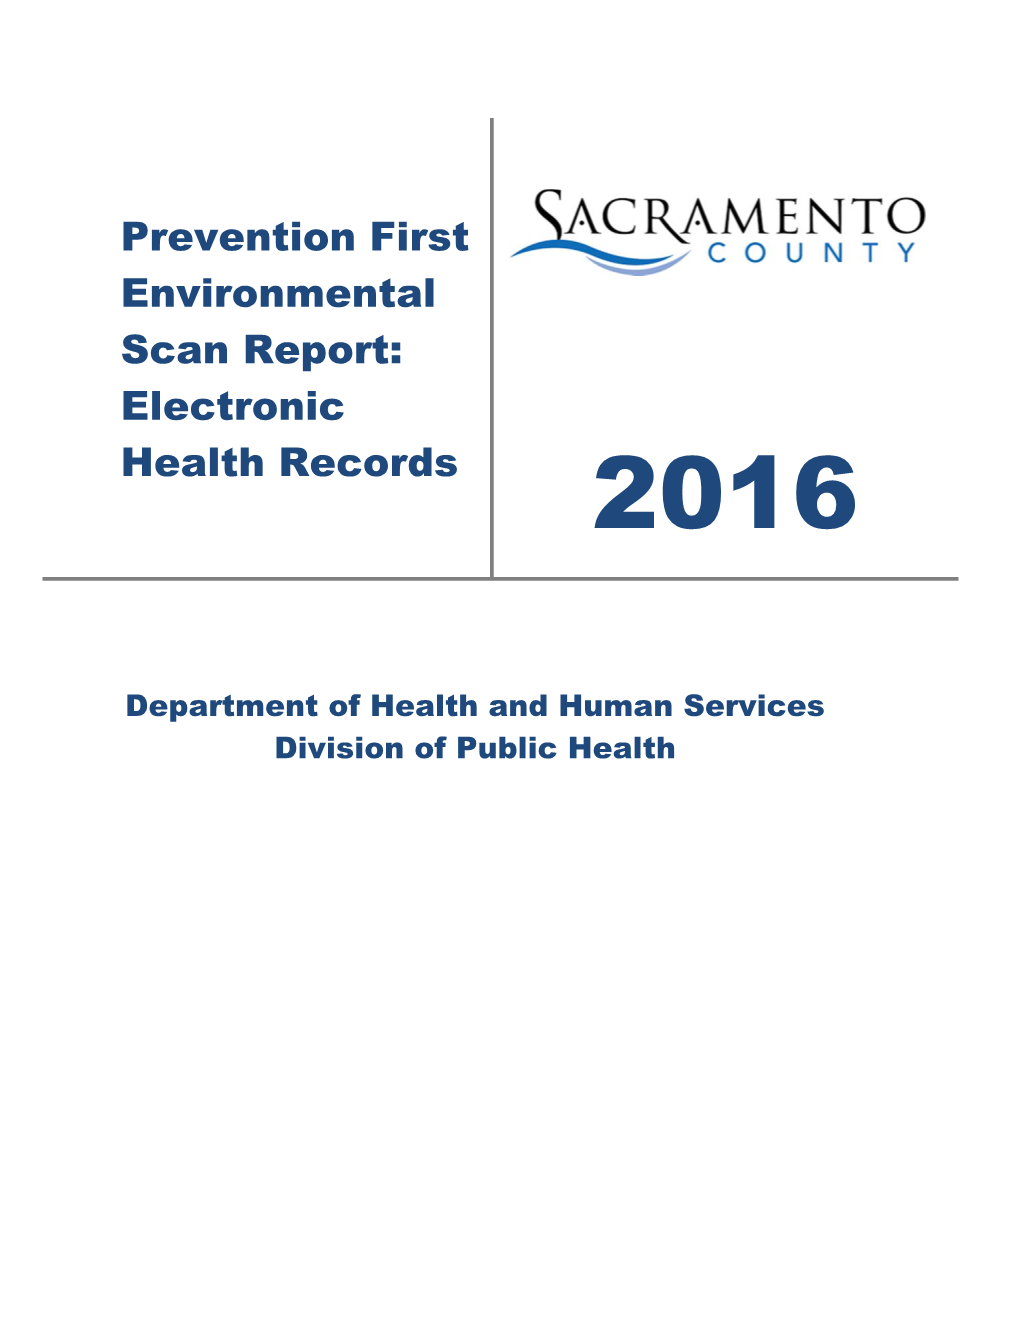 Prevention First Environmental Scan Report: Electronic Health Records 2016